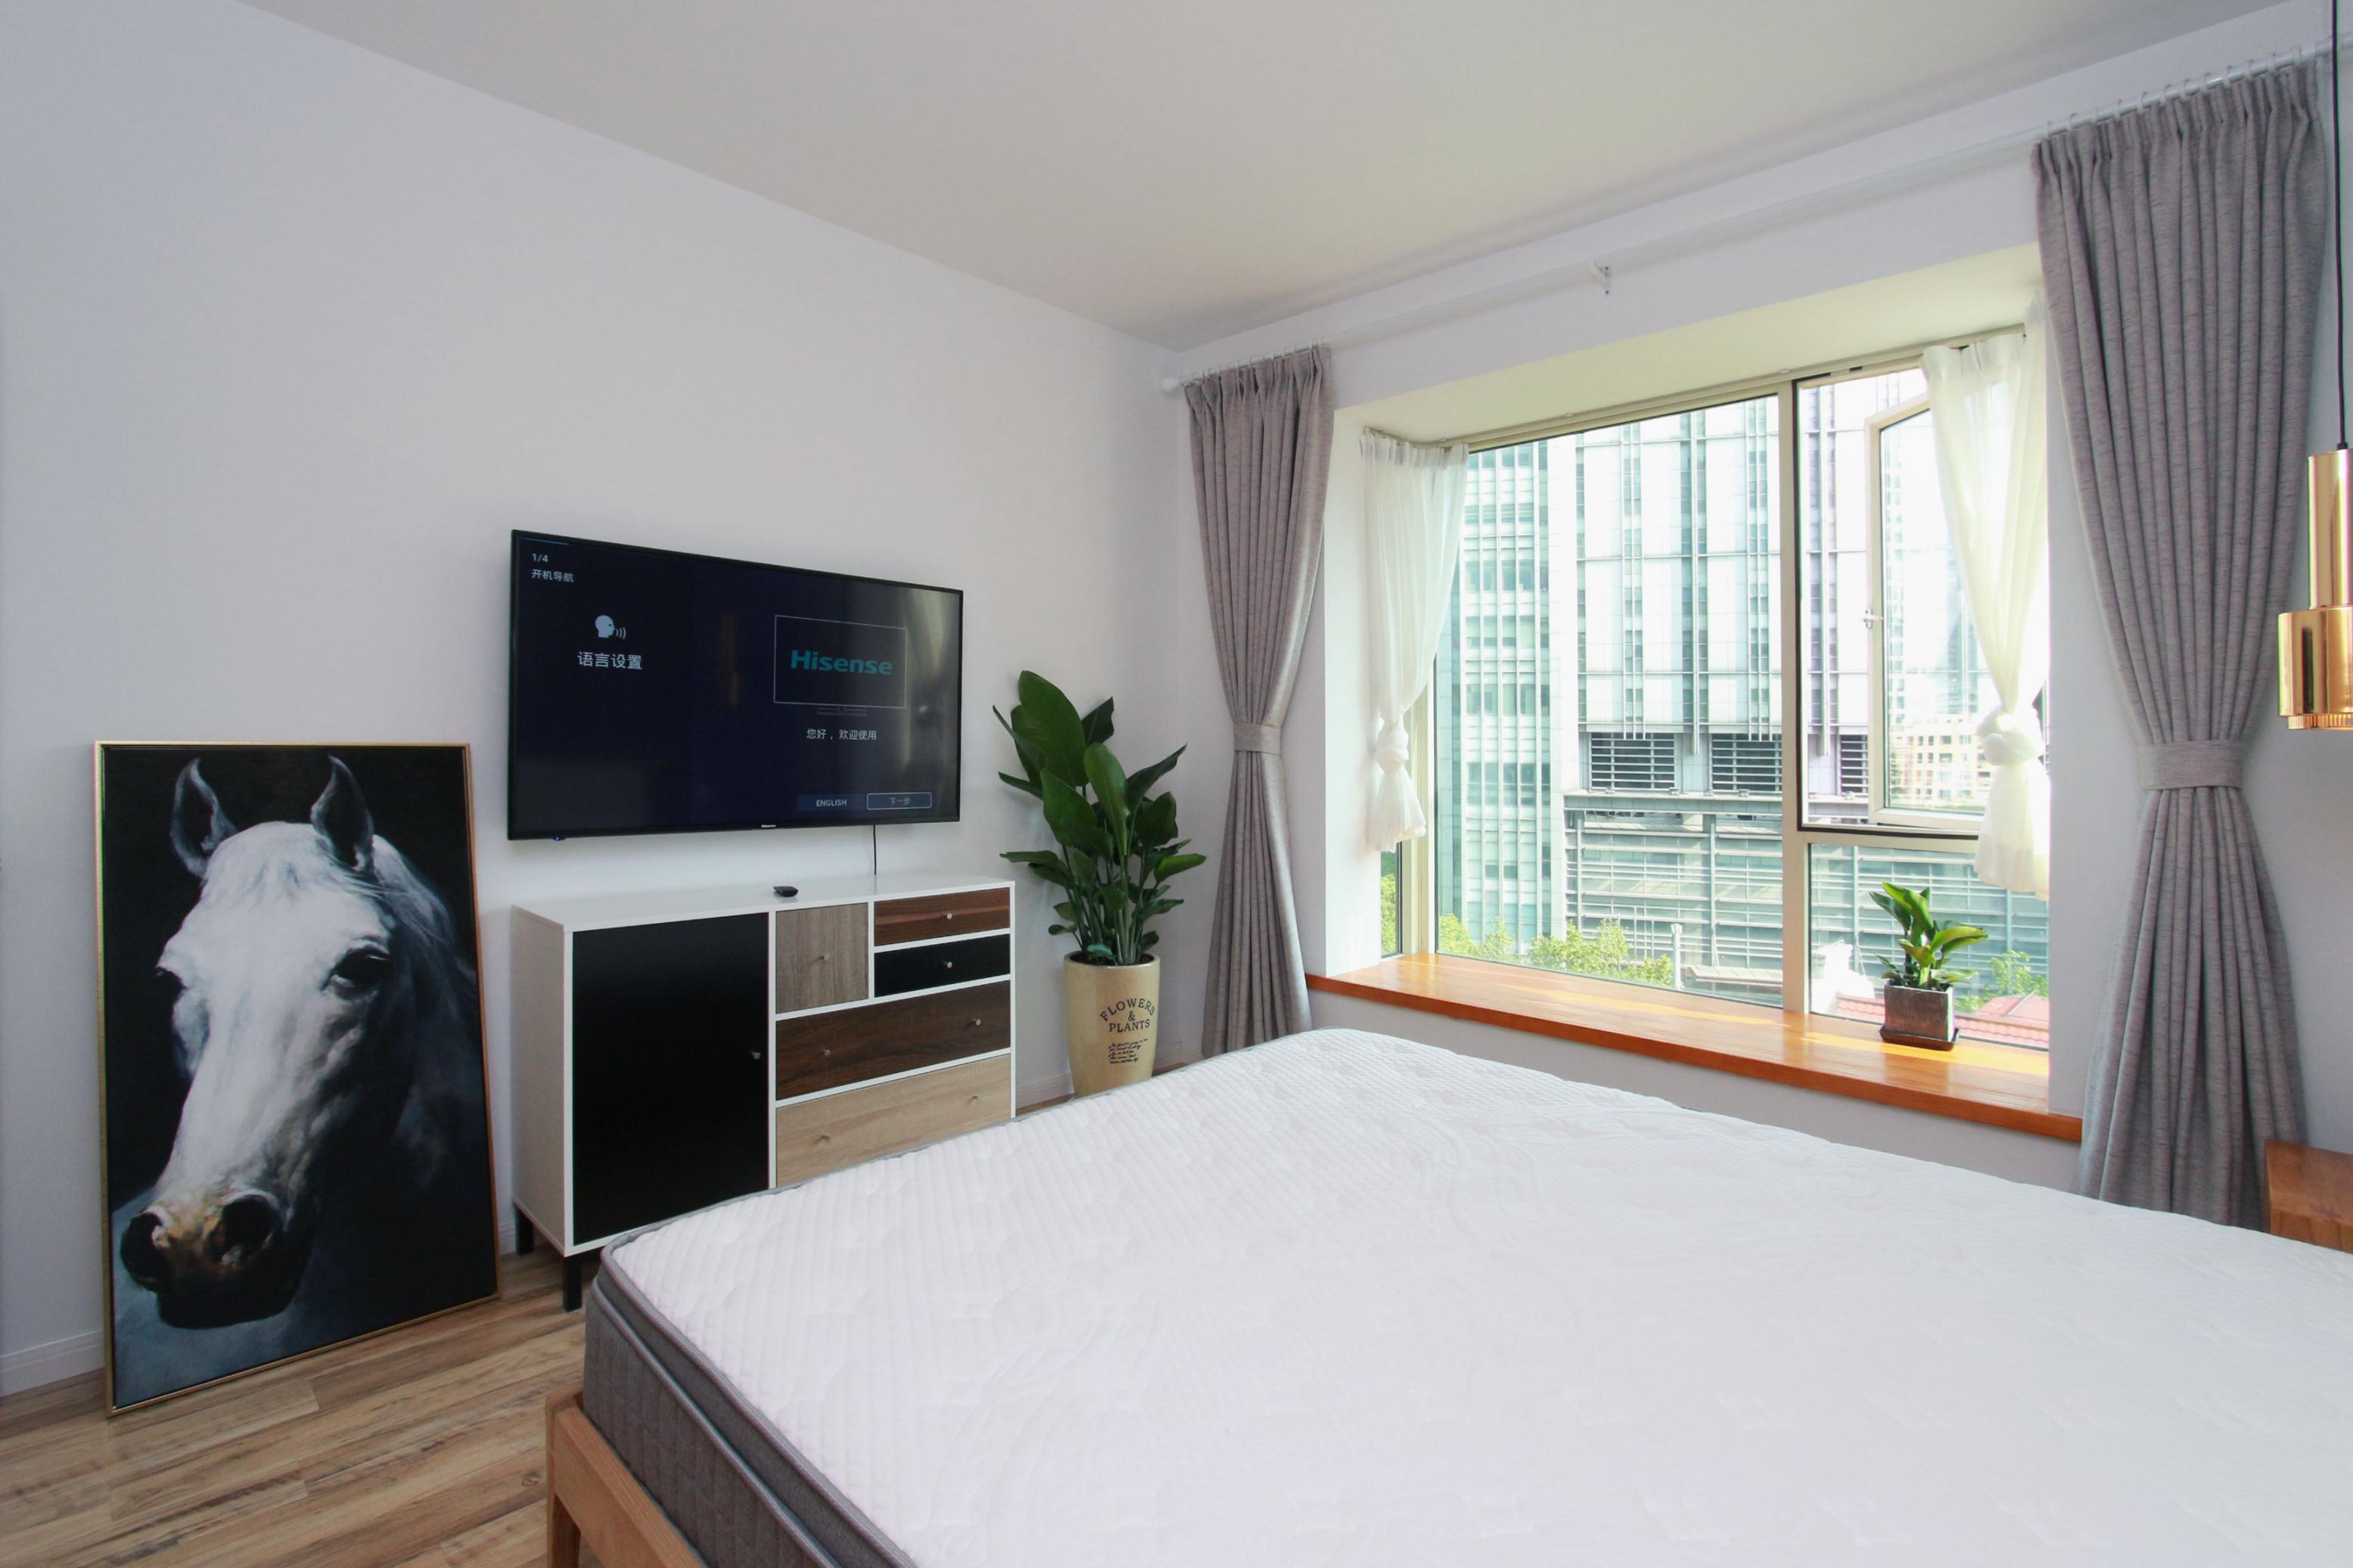 deep alcove Renovated Modern High-end Ladoll 1BR Apt LN 2/12/13 for Rent in Shanghai